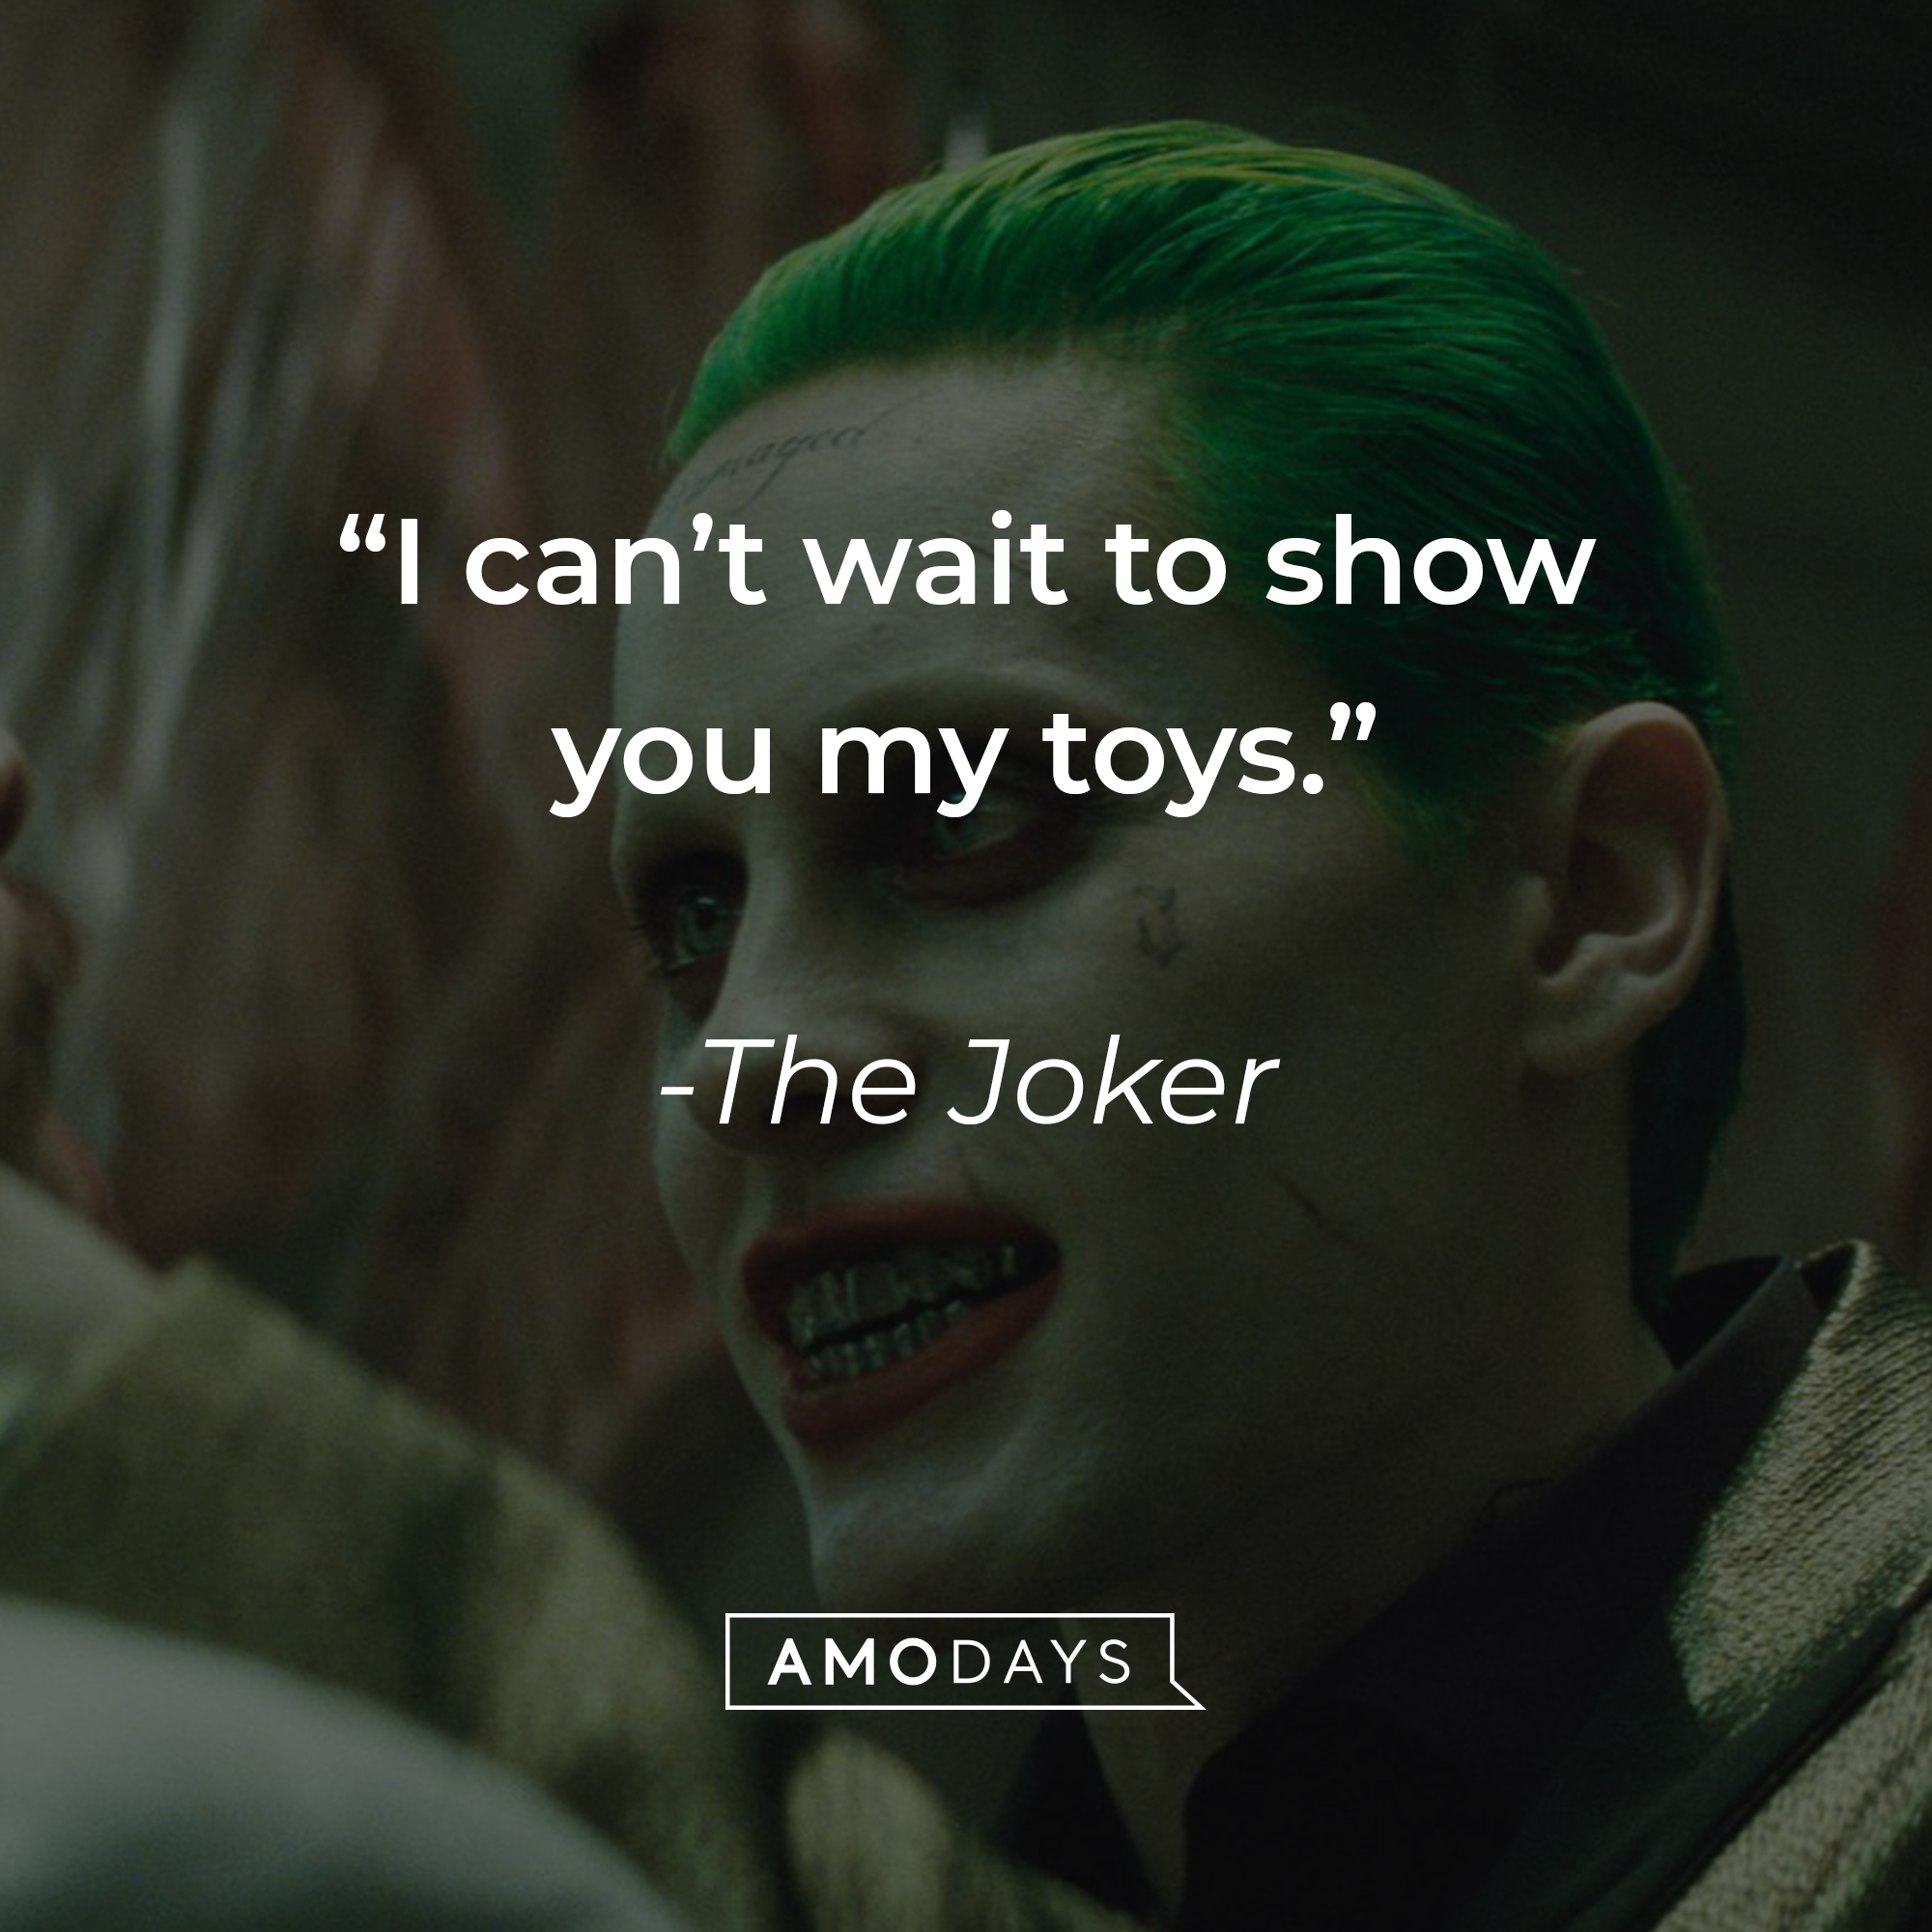 The Joker's quote: "I can't wait to show you my toys." | Source: facebook.com/thesuicidesquad